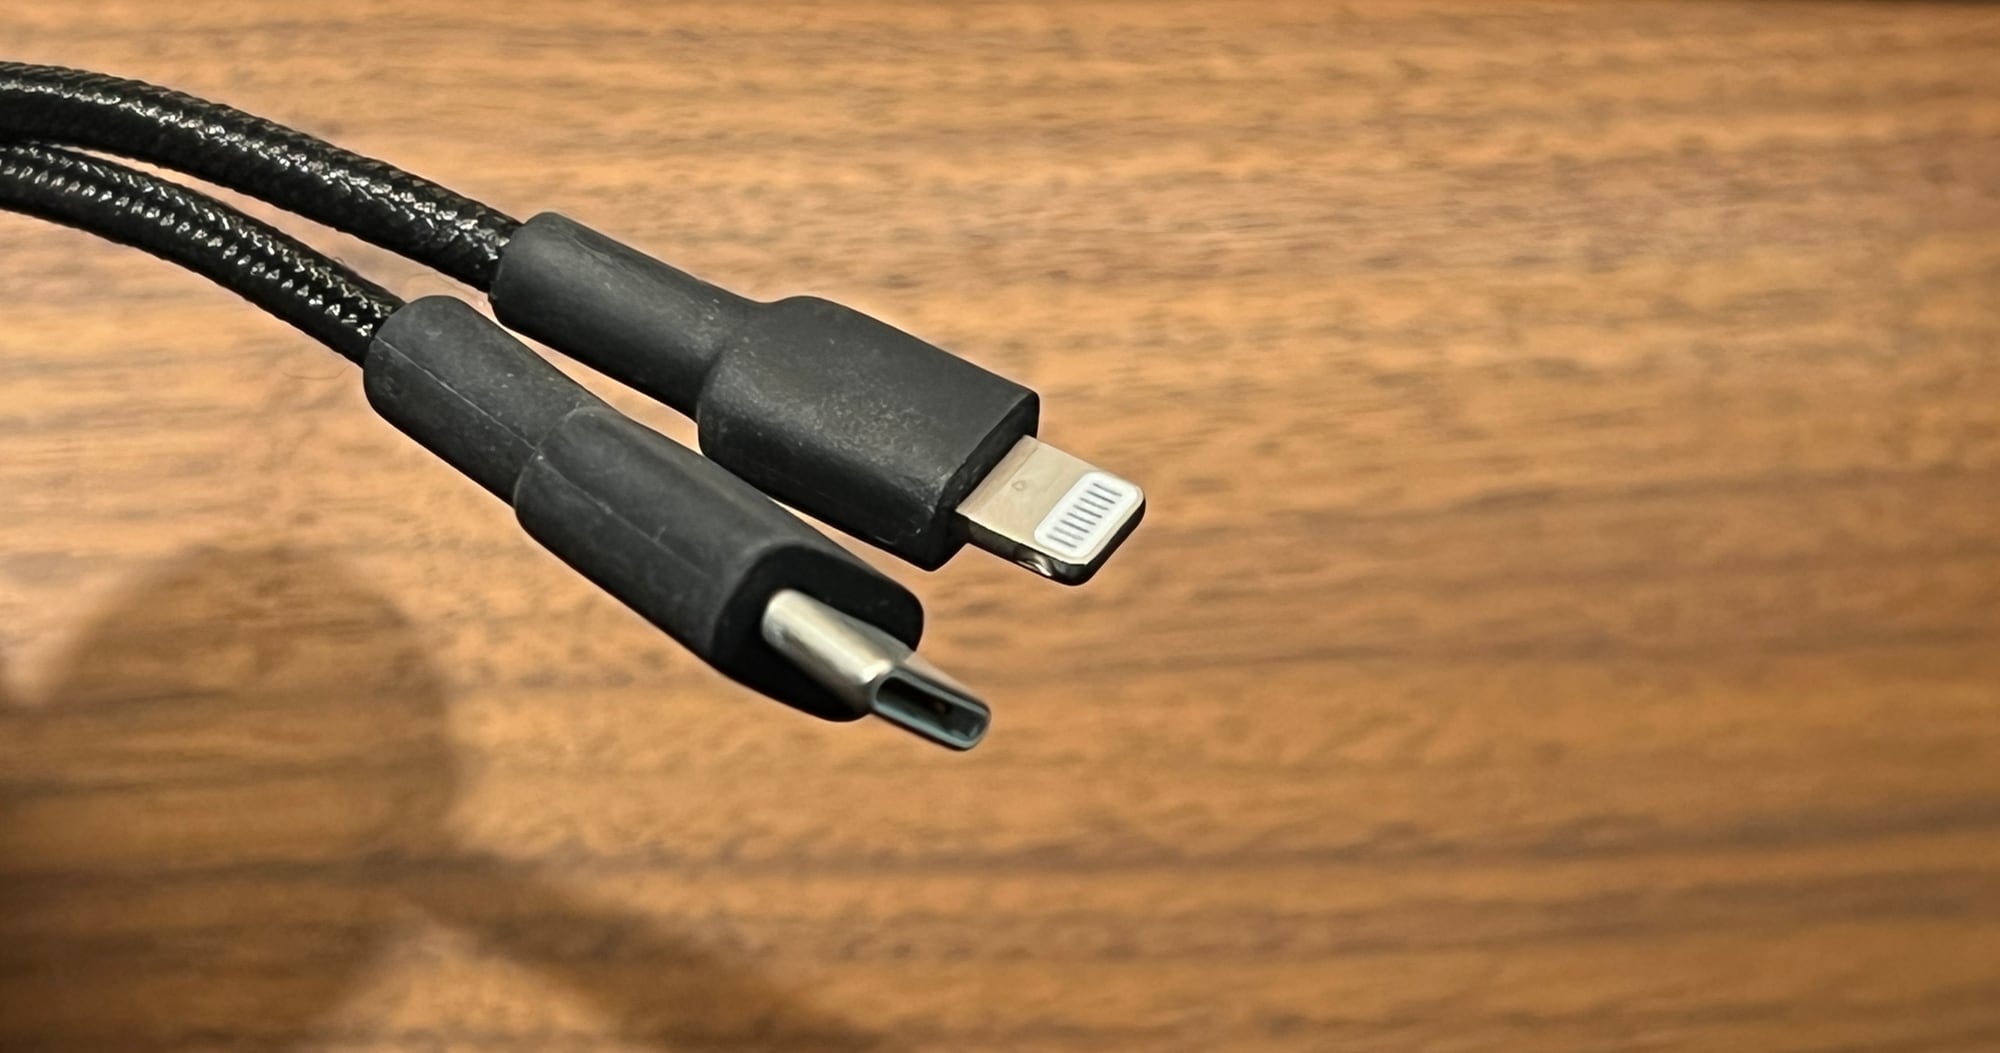 USB-C coming to iPhone next year, according to Bloomberg